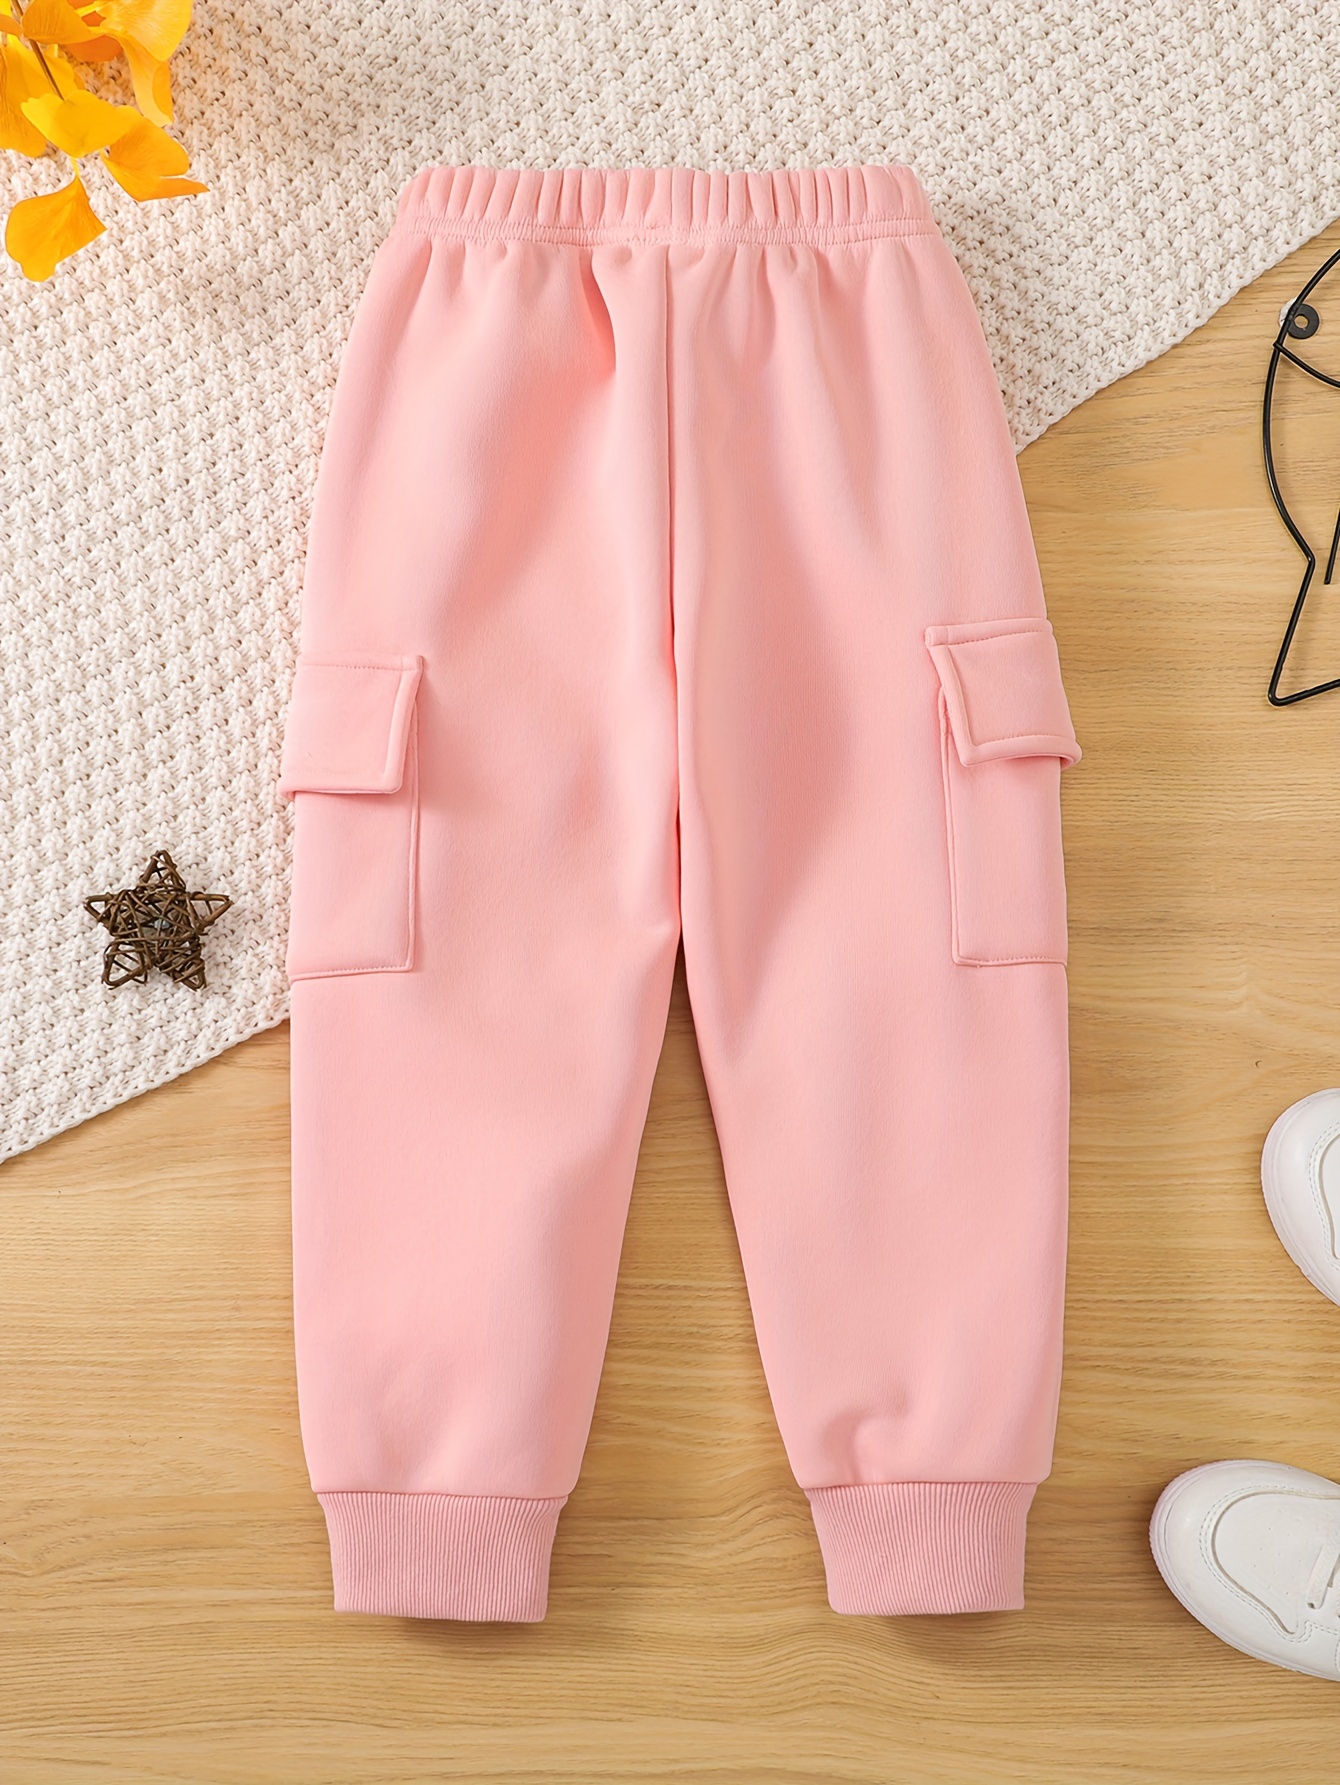 Women's Baby Pink Solid Cargo Joggers